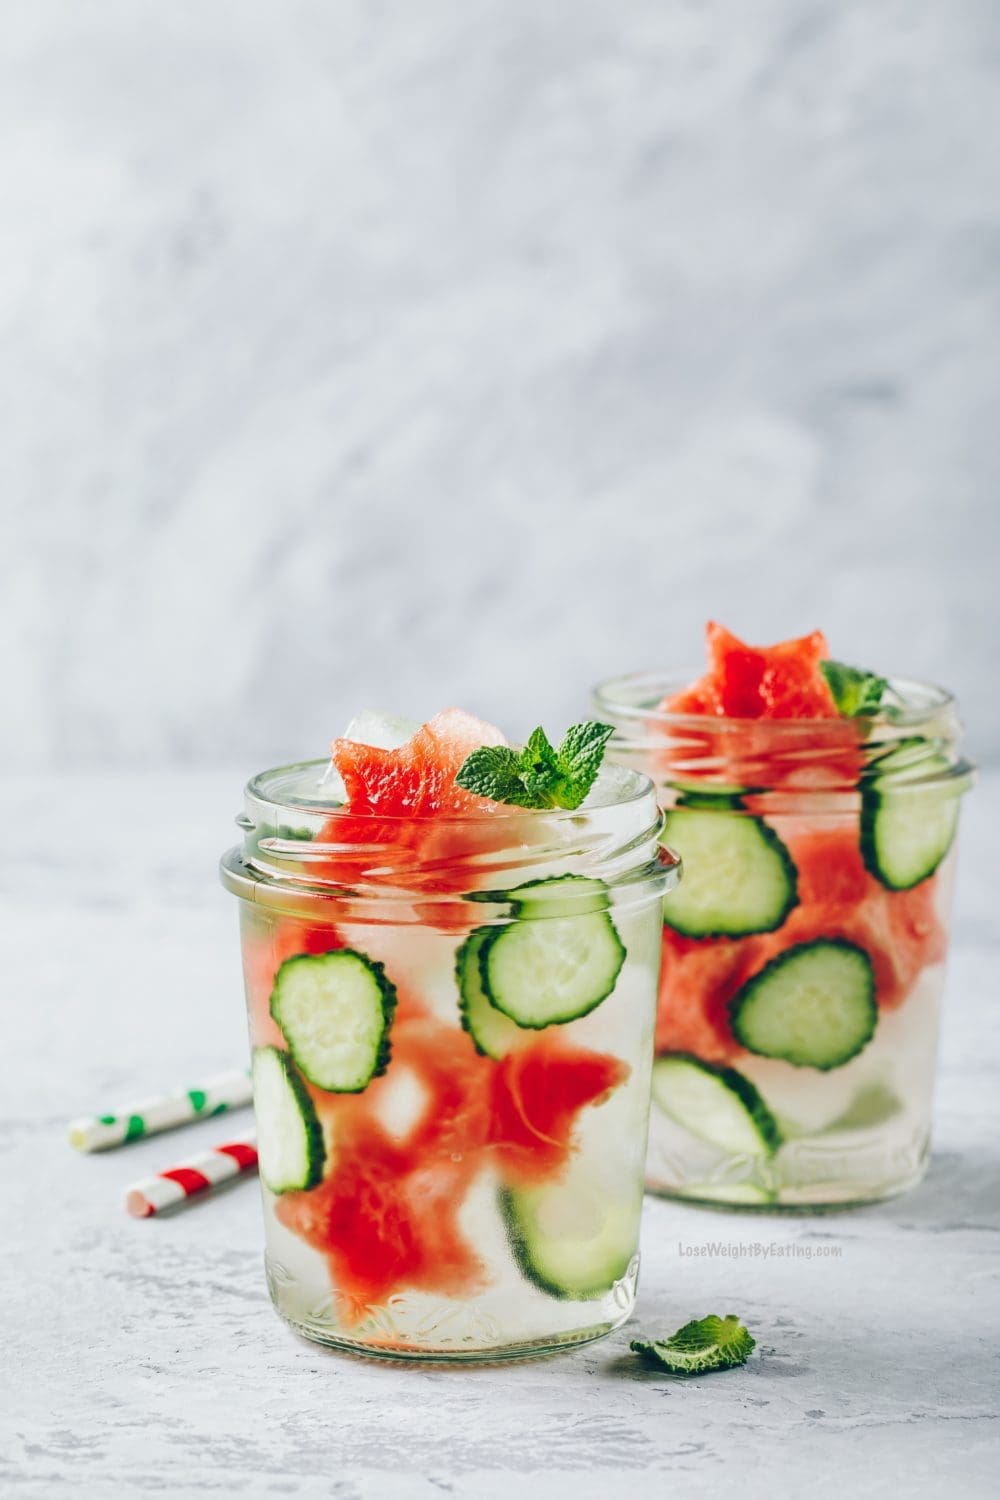 The 10 Best Detox Cucumber Water Recipes for Weight Loss